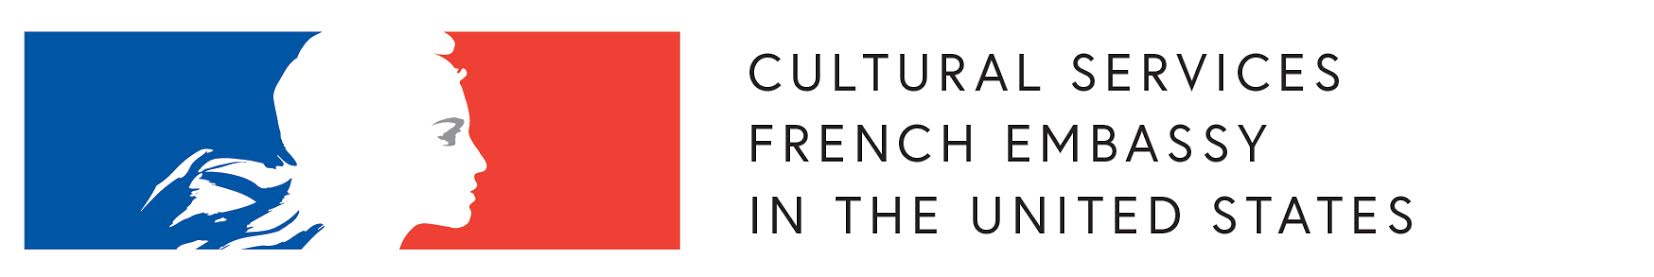 Cultural Services French Embassy Logo